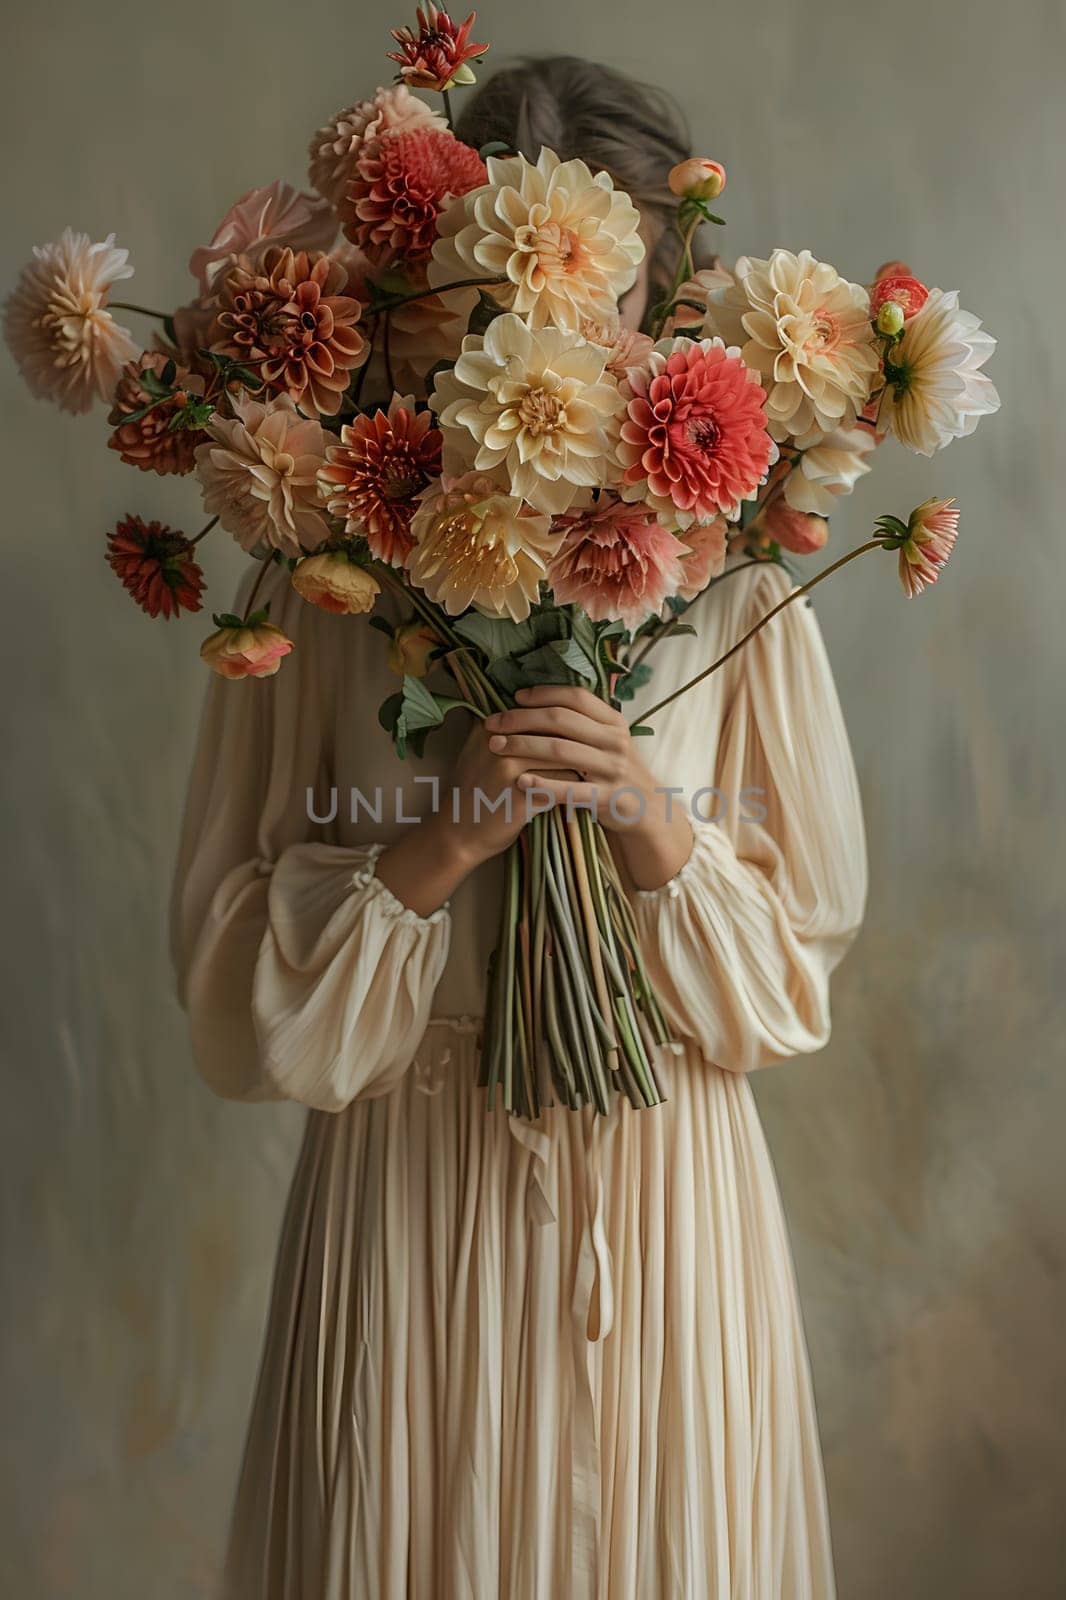 A lady in a dress creatively holds a peach rose bouquet in front of her face by Nadtochiy